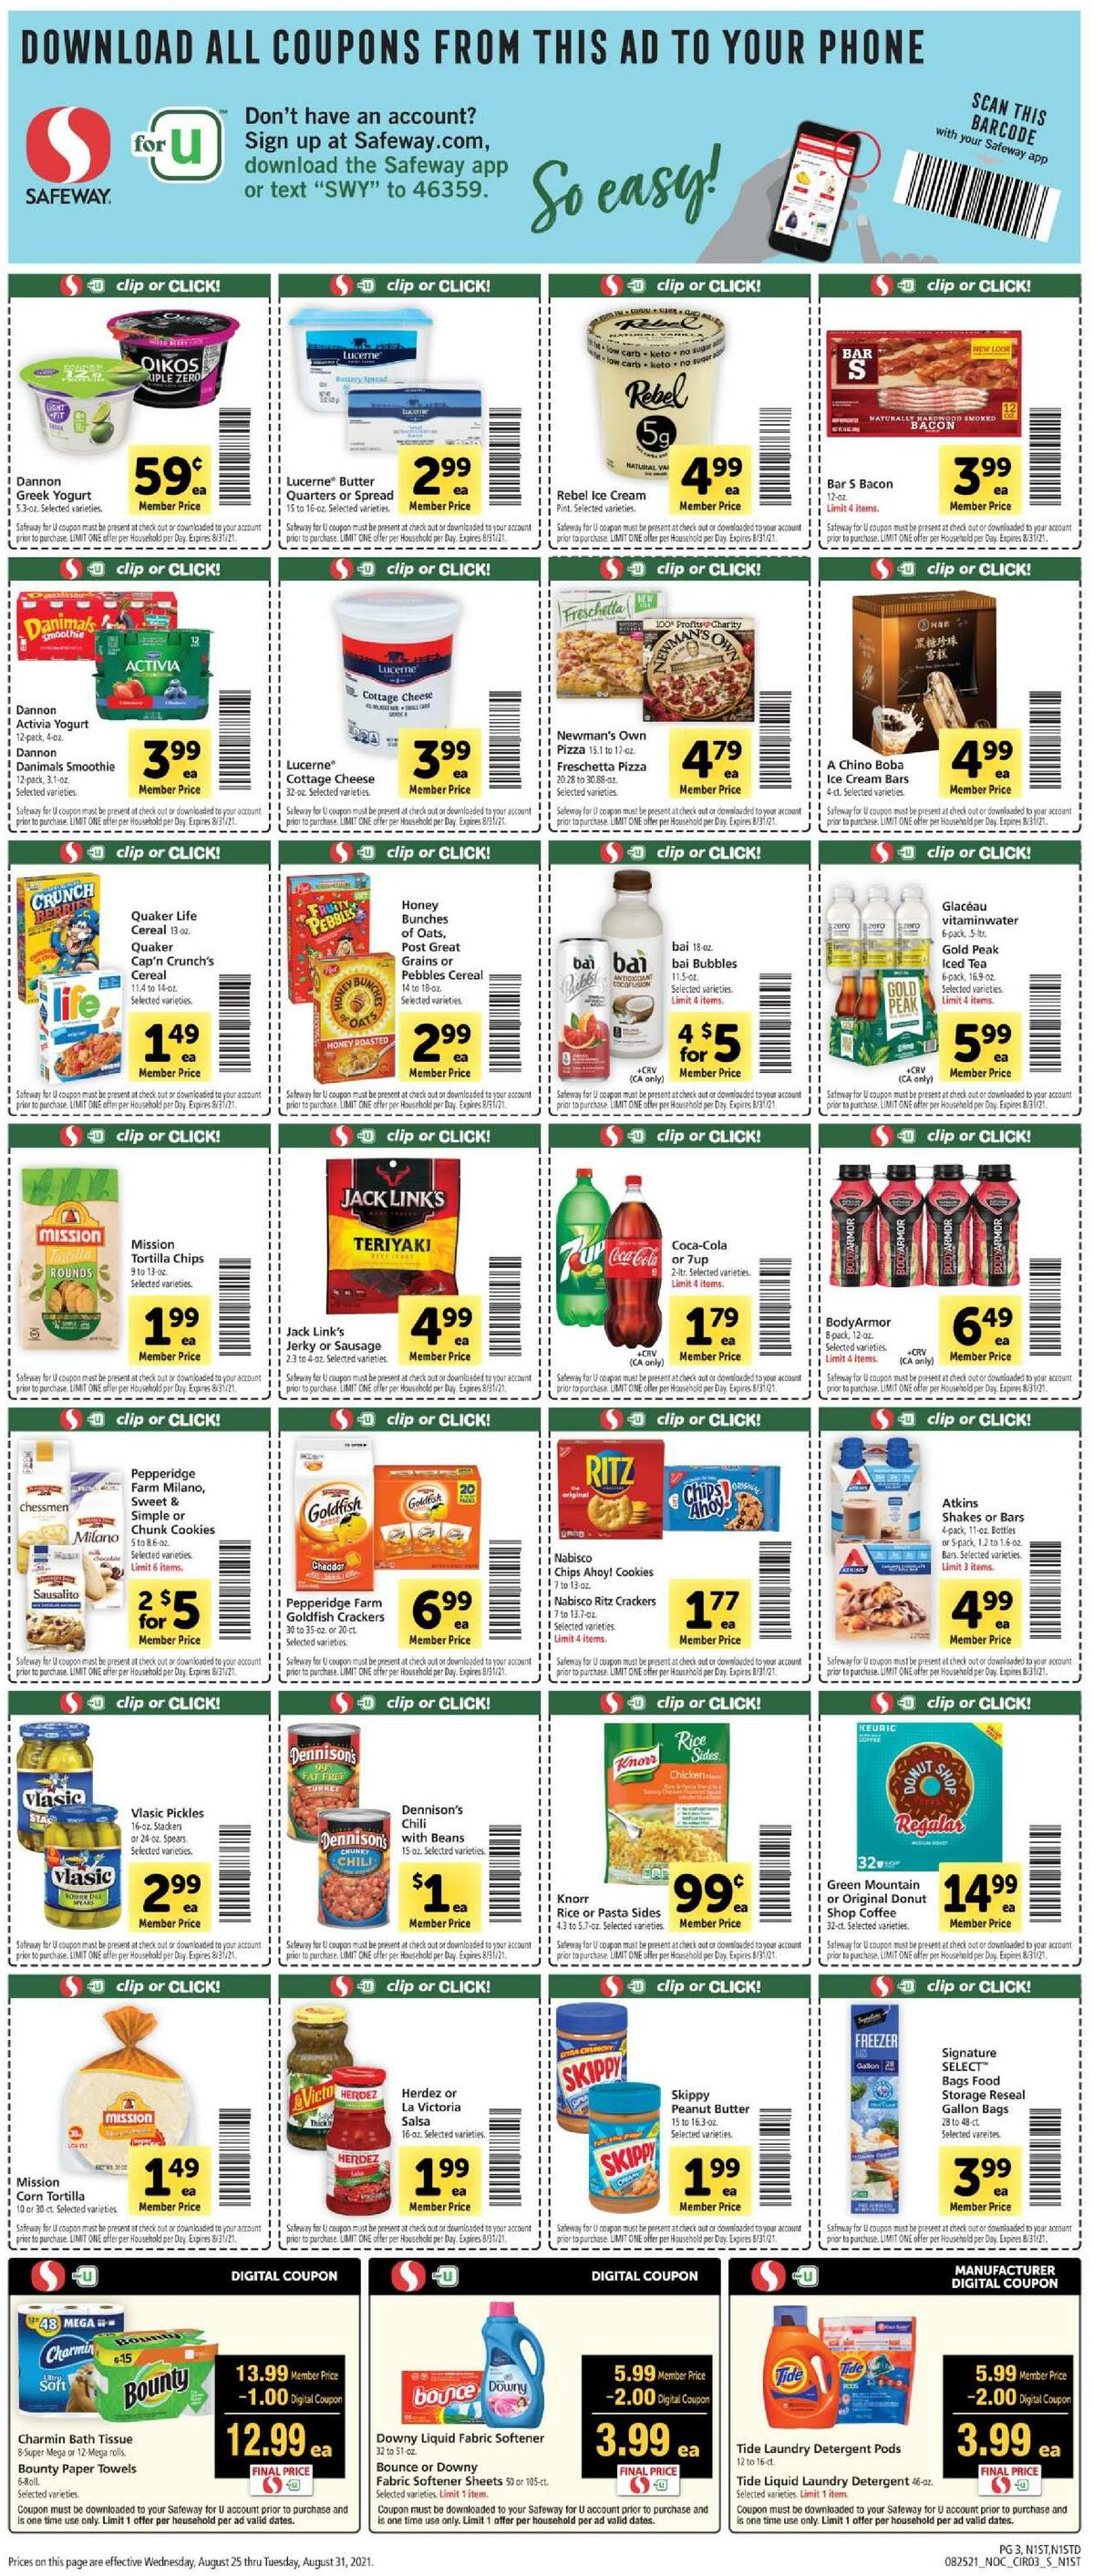 Safeway Weekly Ad from August 25